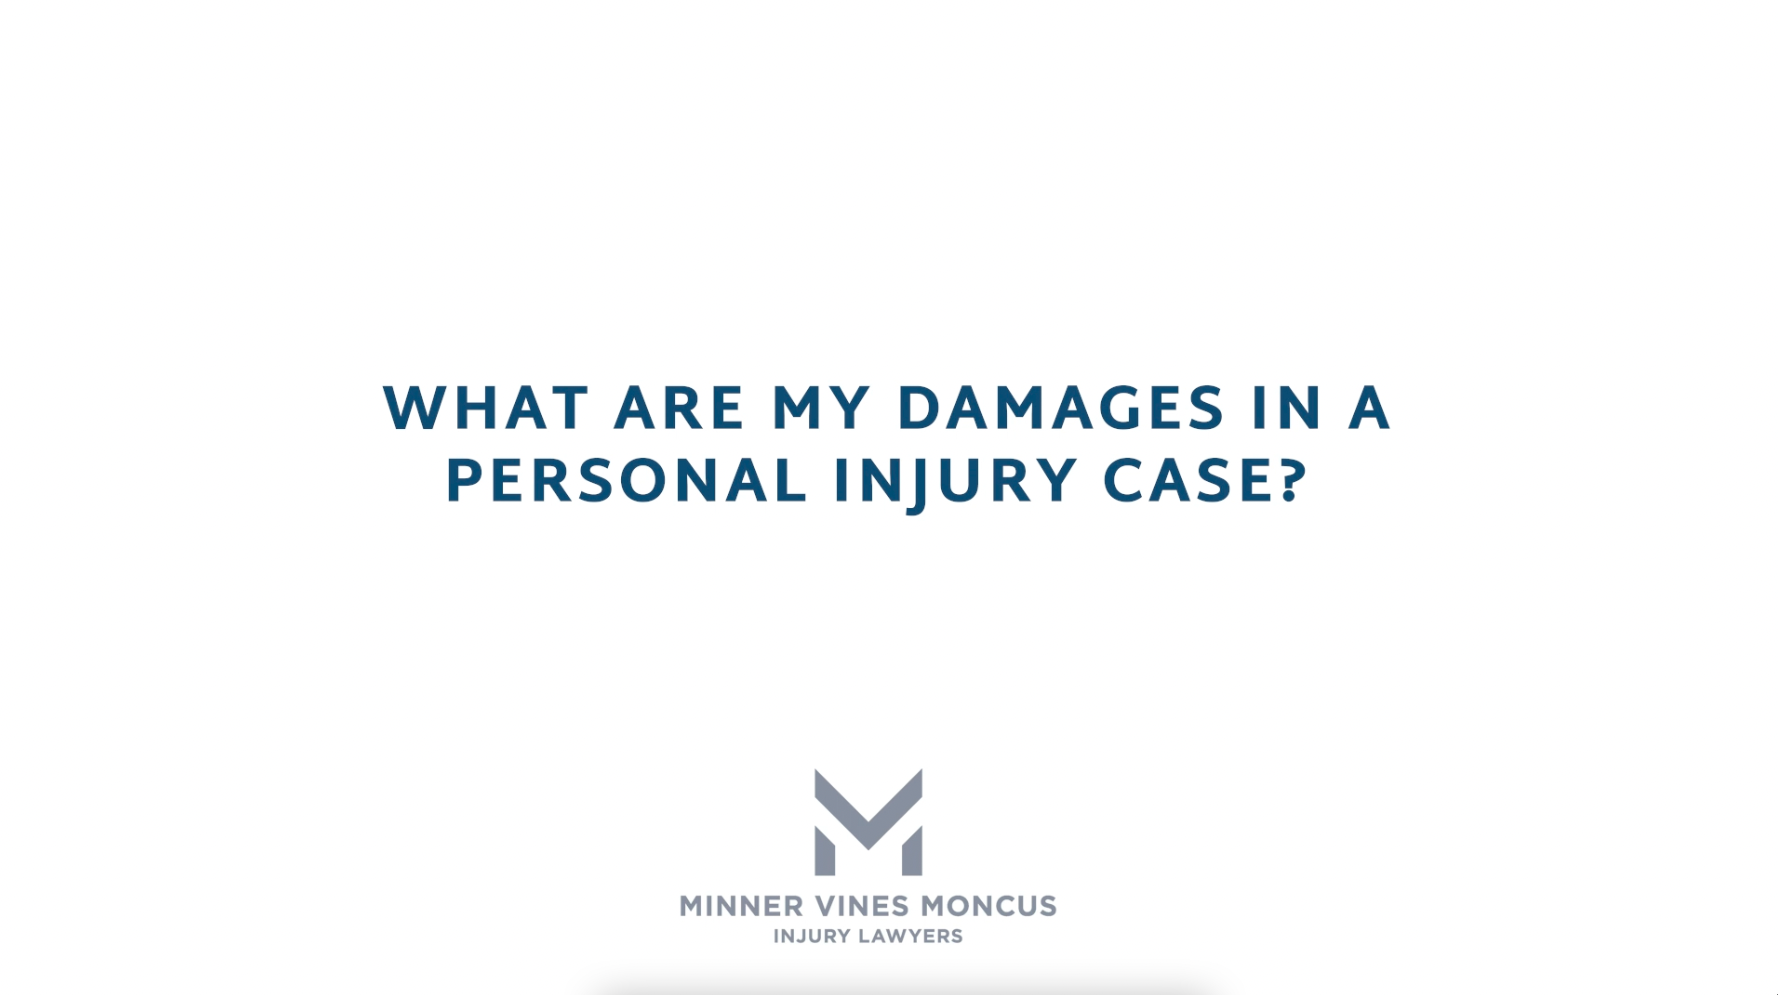 What are my damages in a personal injury case?